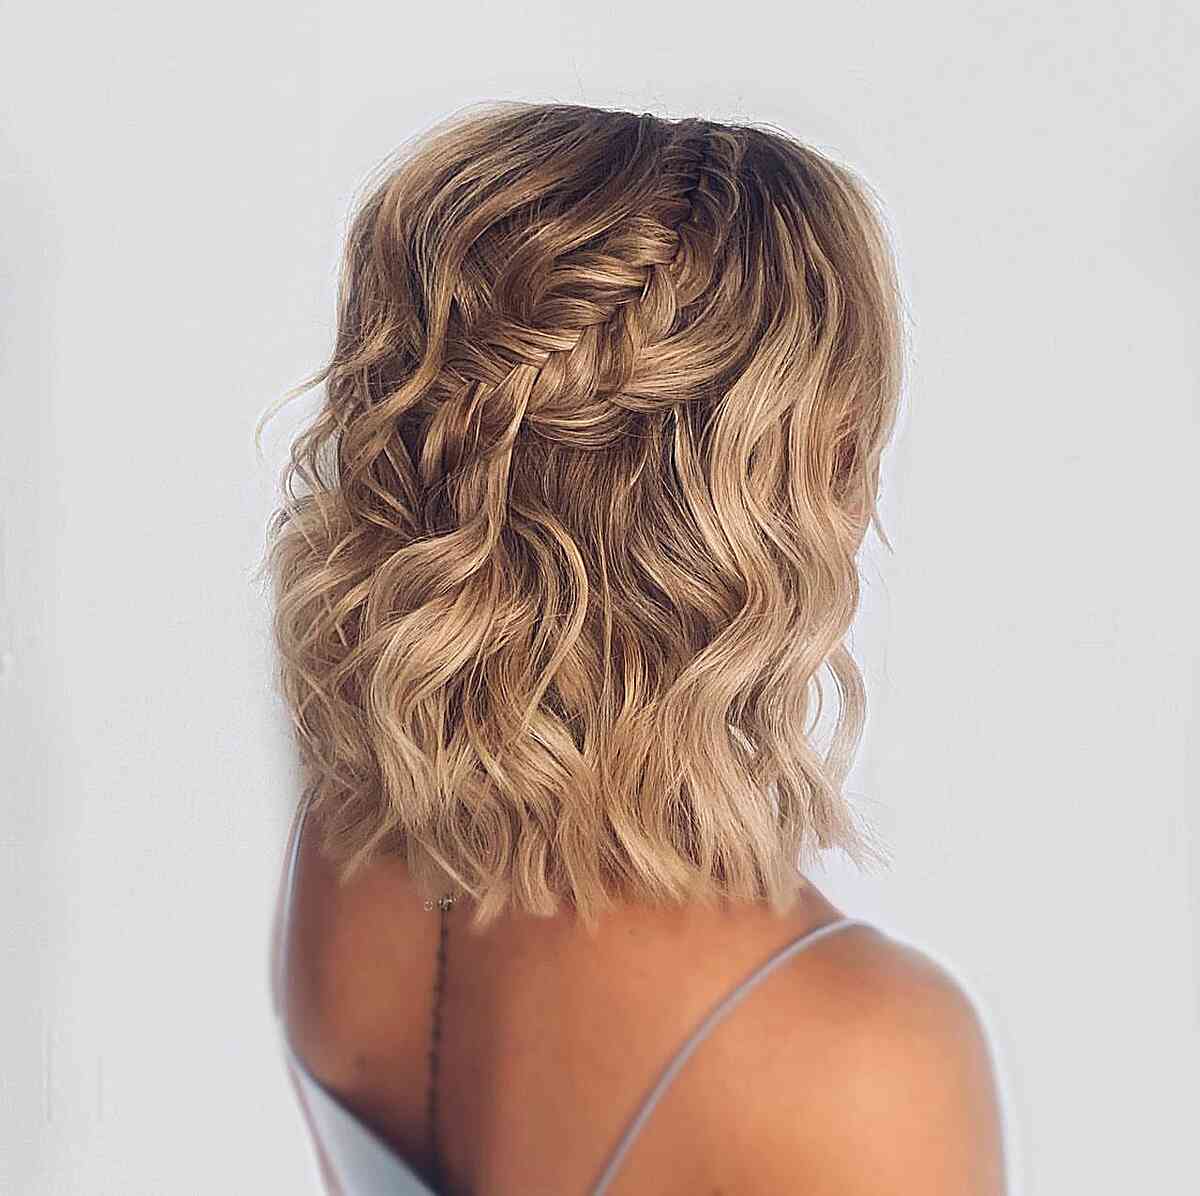 Picture of a boho inspired braid shoulder length hair